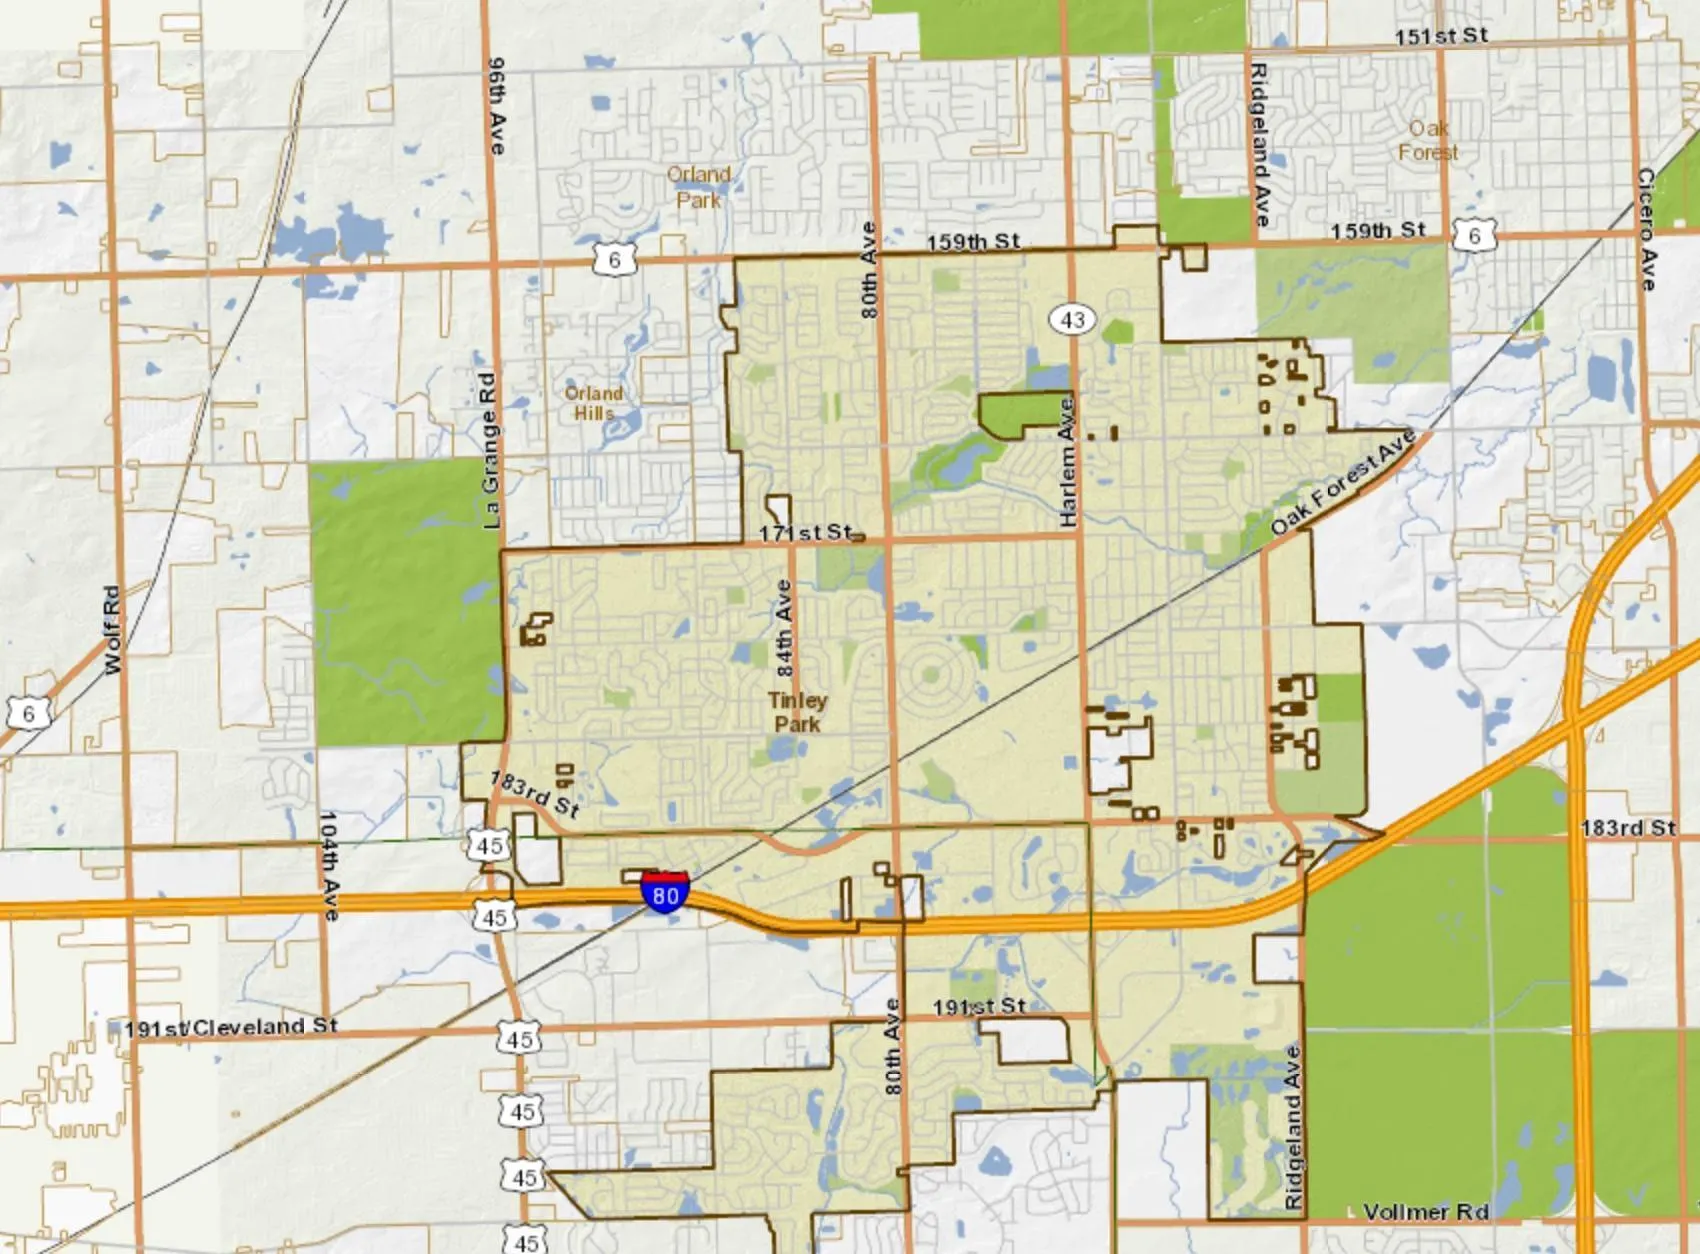 GIS Consortium Map of the Village of Tinley Park as of June 2018